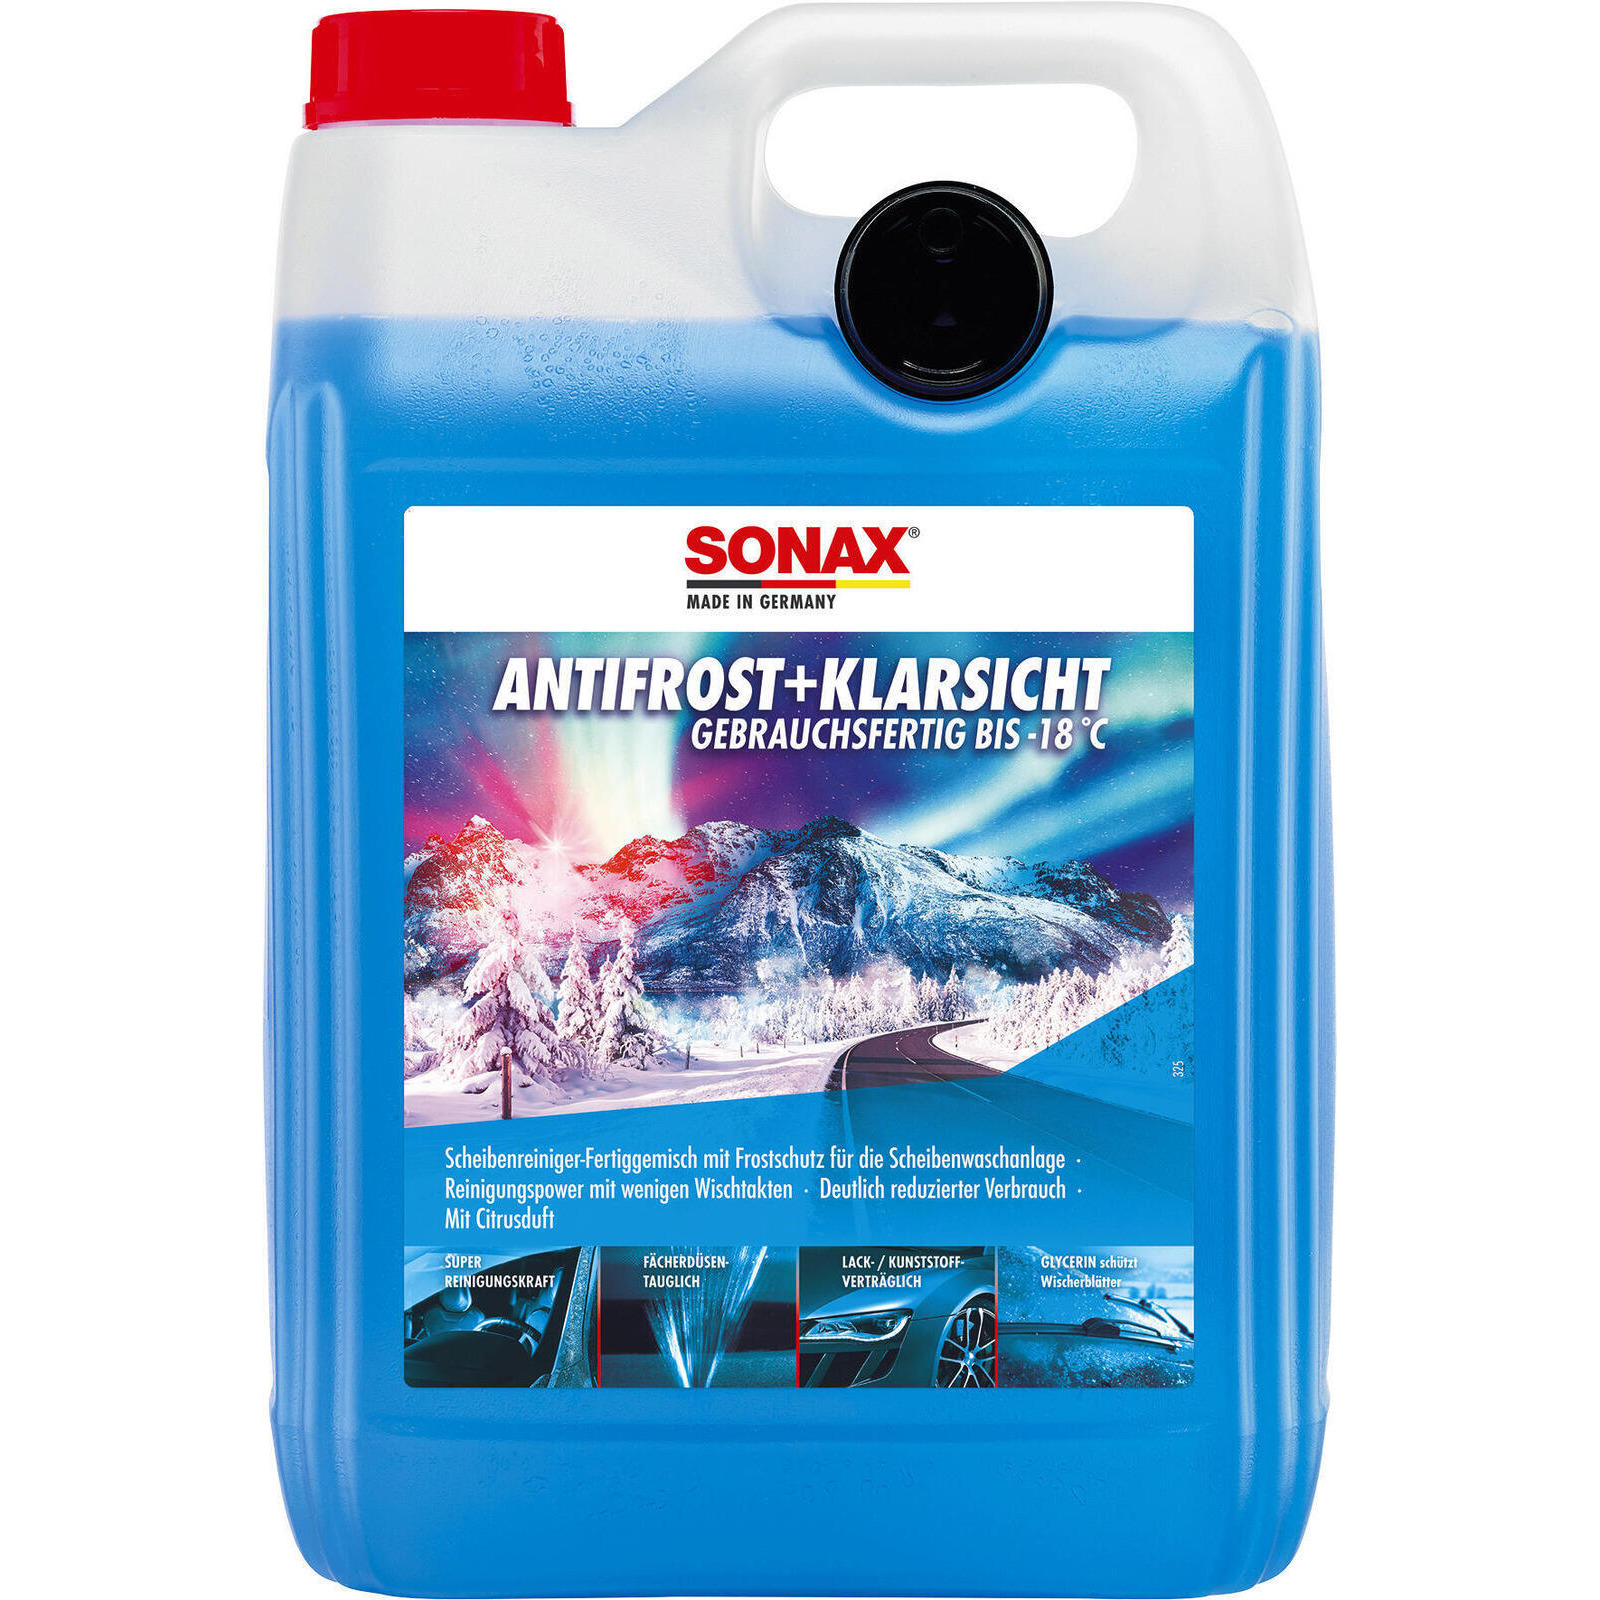 SONAX Antifreeze, window cleaning system AntiFreeze + clear view ready-to-use